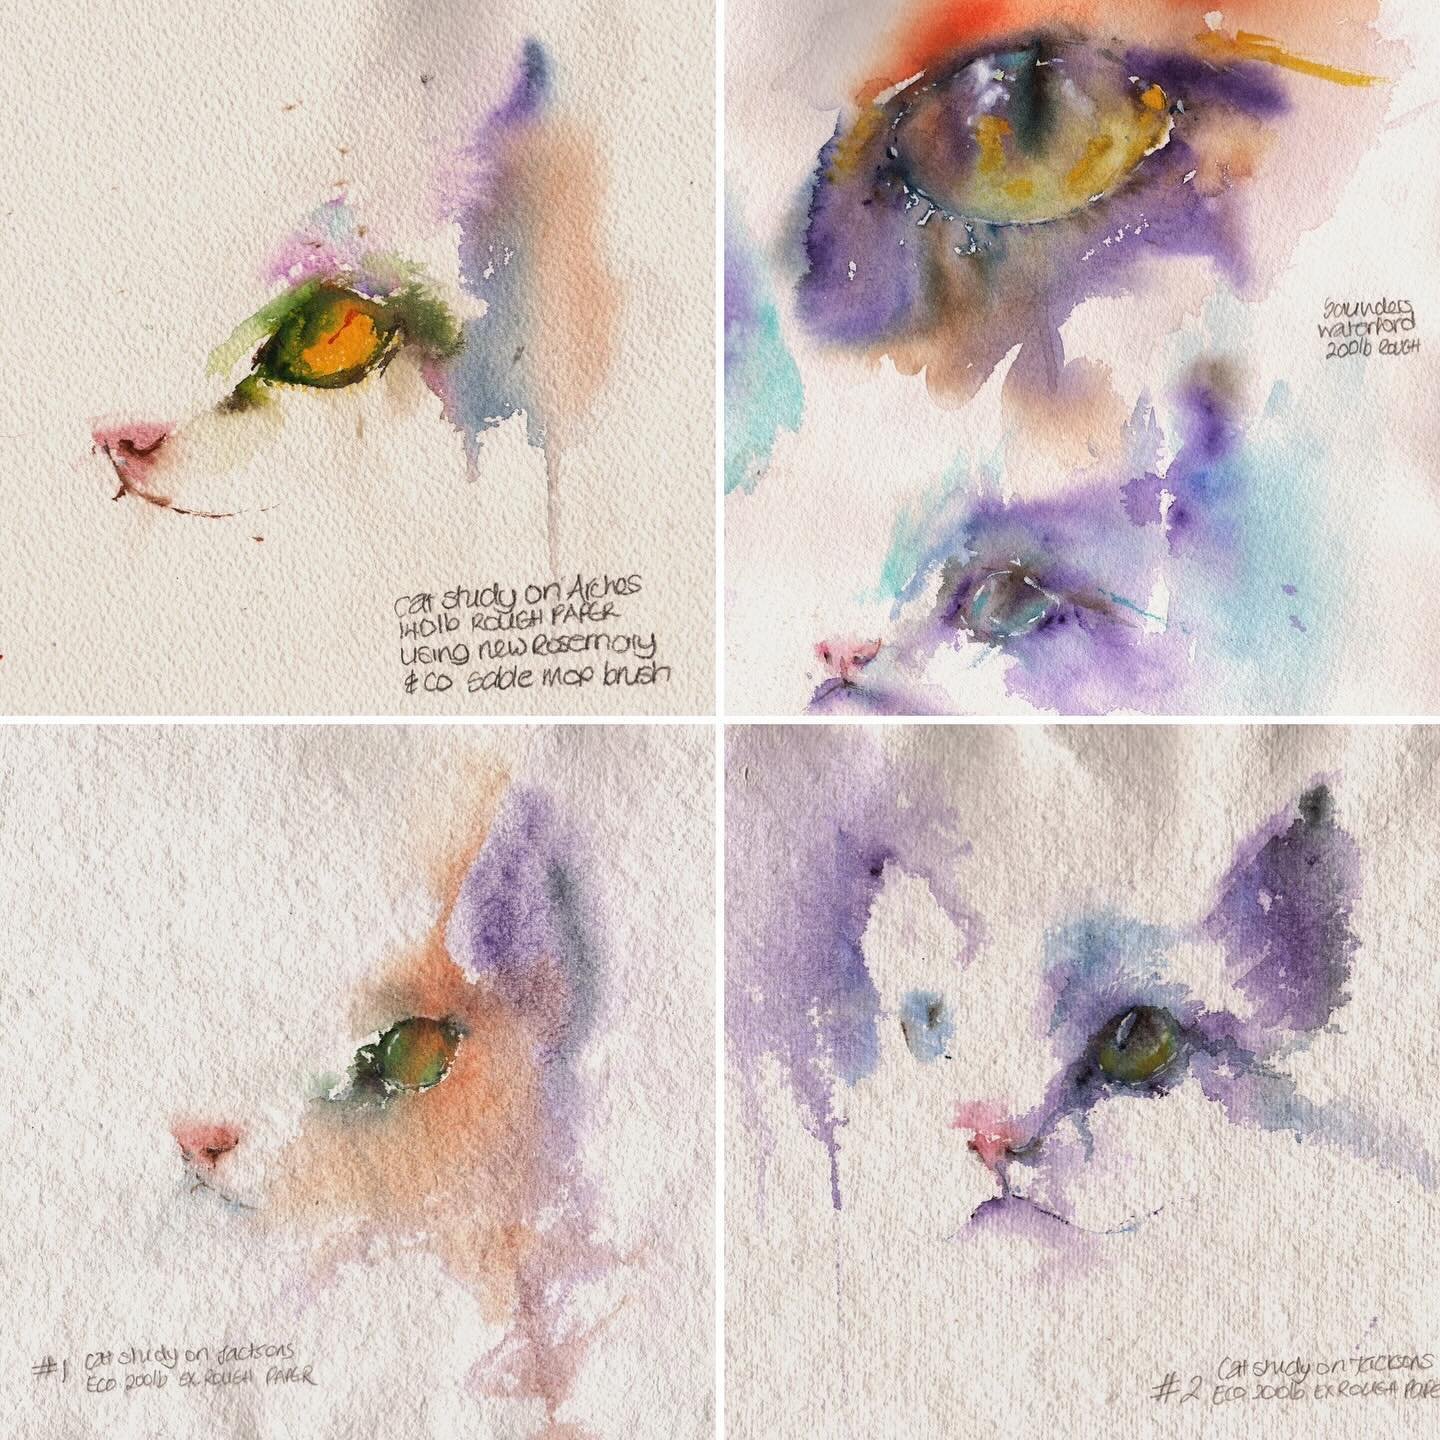 Here are a few cats eyes studies I did on various watercolour papers. Experimentation in the studio is so important for my growth and development. It's also lots of fun without the pressure of finishing. 

#watercolor #watercolour #watercolorstudy #w